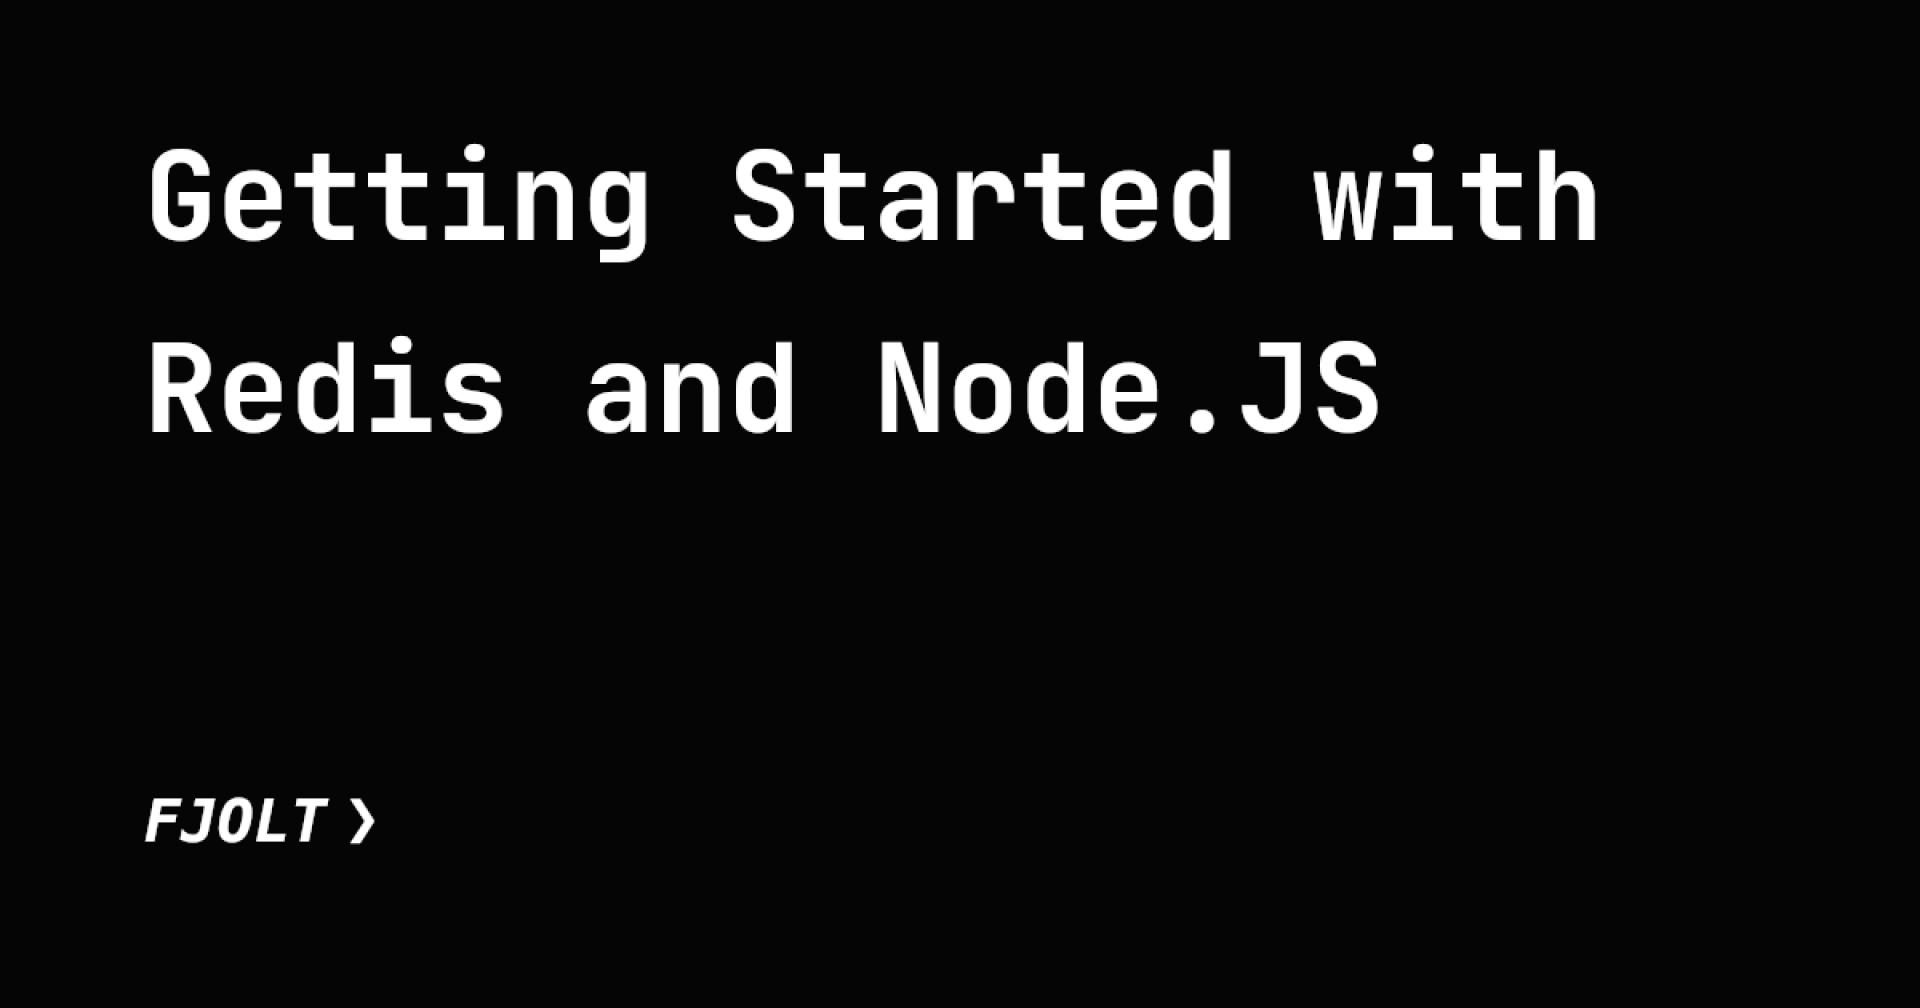 Getting Started with Redis and Node.JS